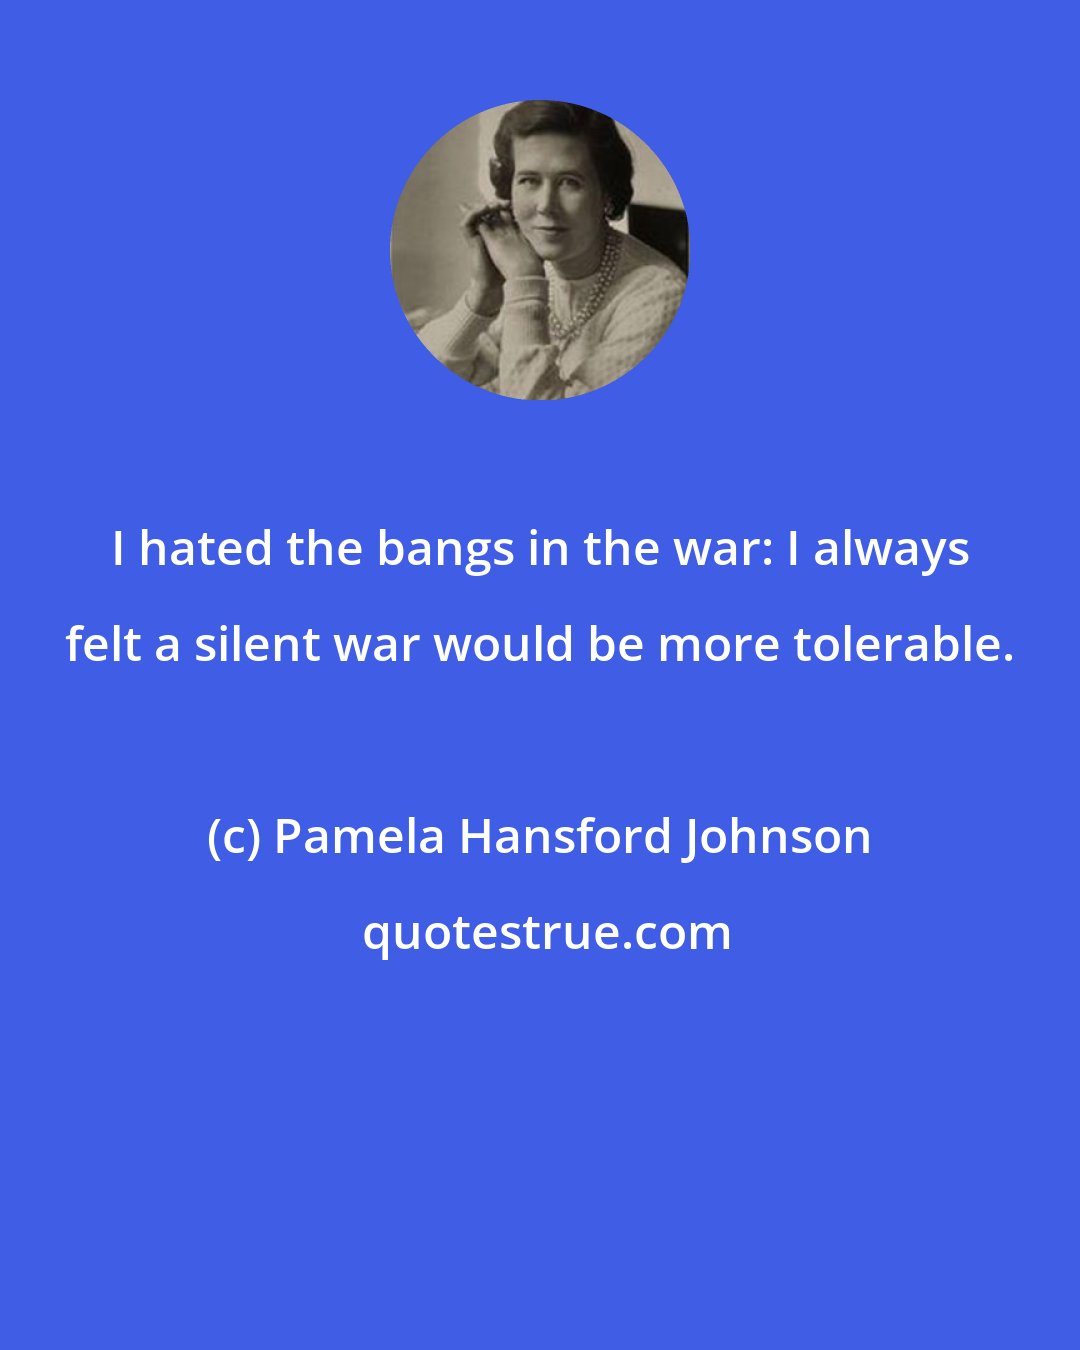 Pamela Hansford Johnson: I hated the bangs in the war: I always felt a silent war would be more tolerable.